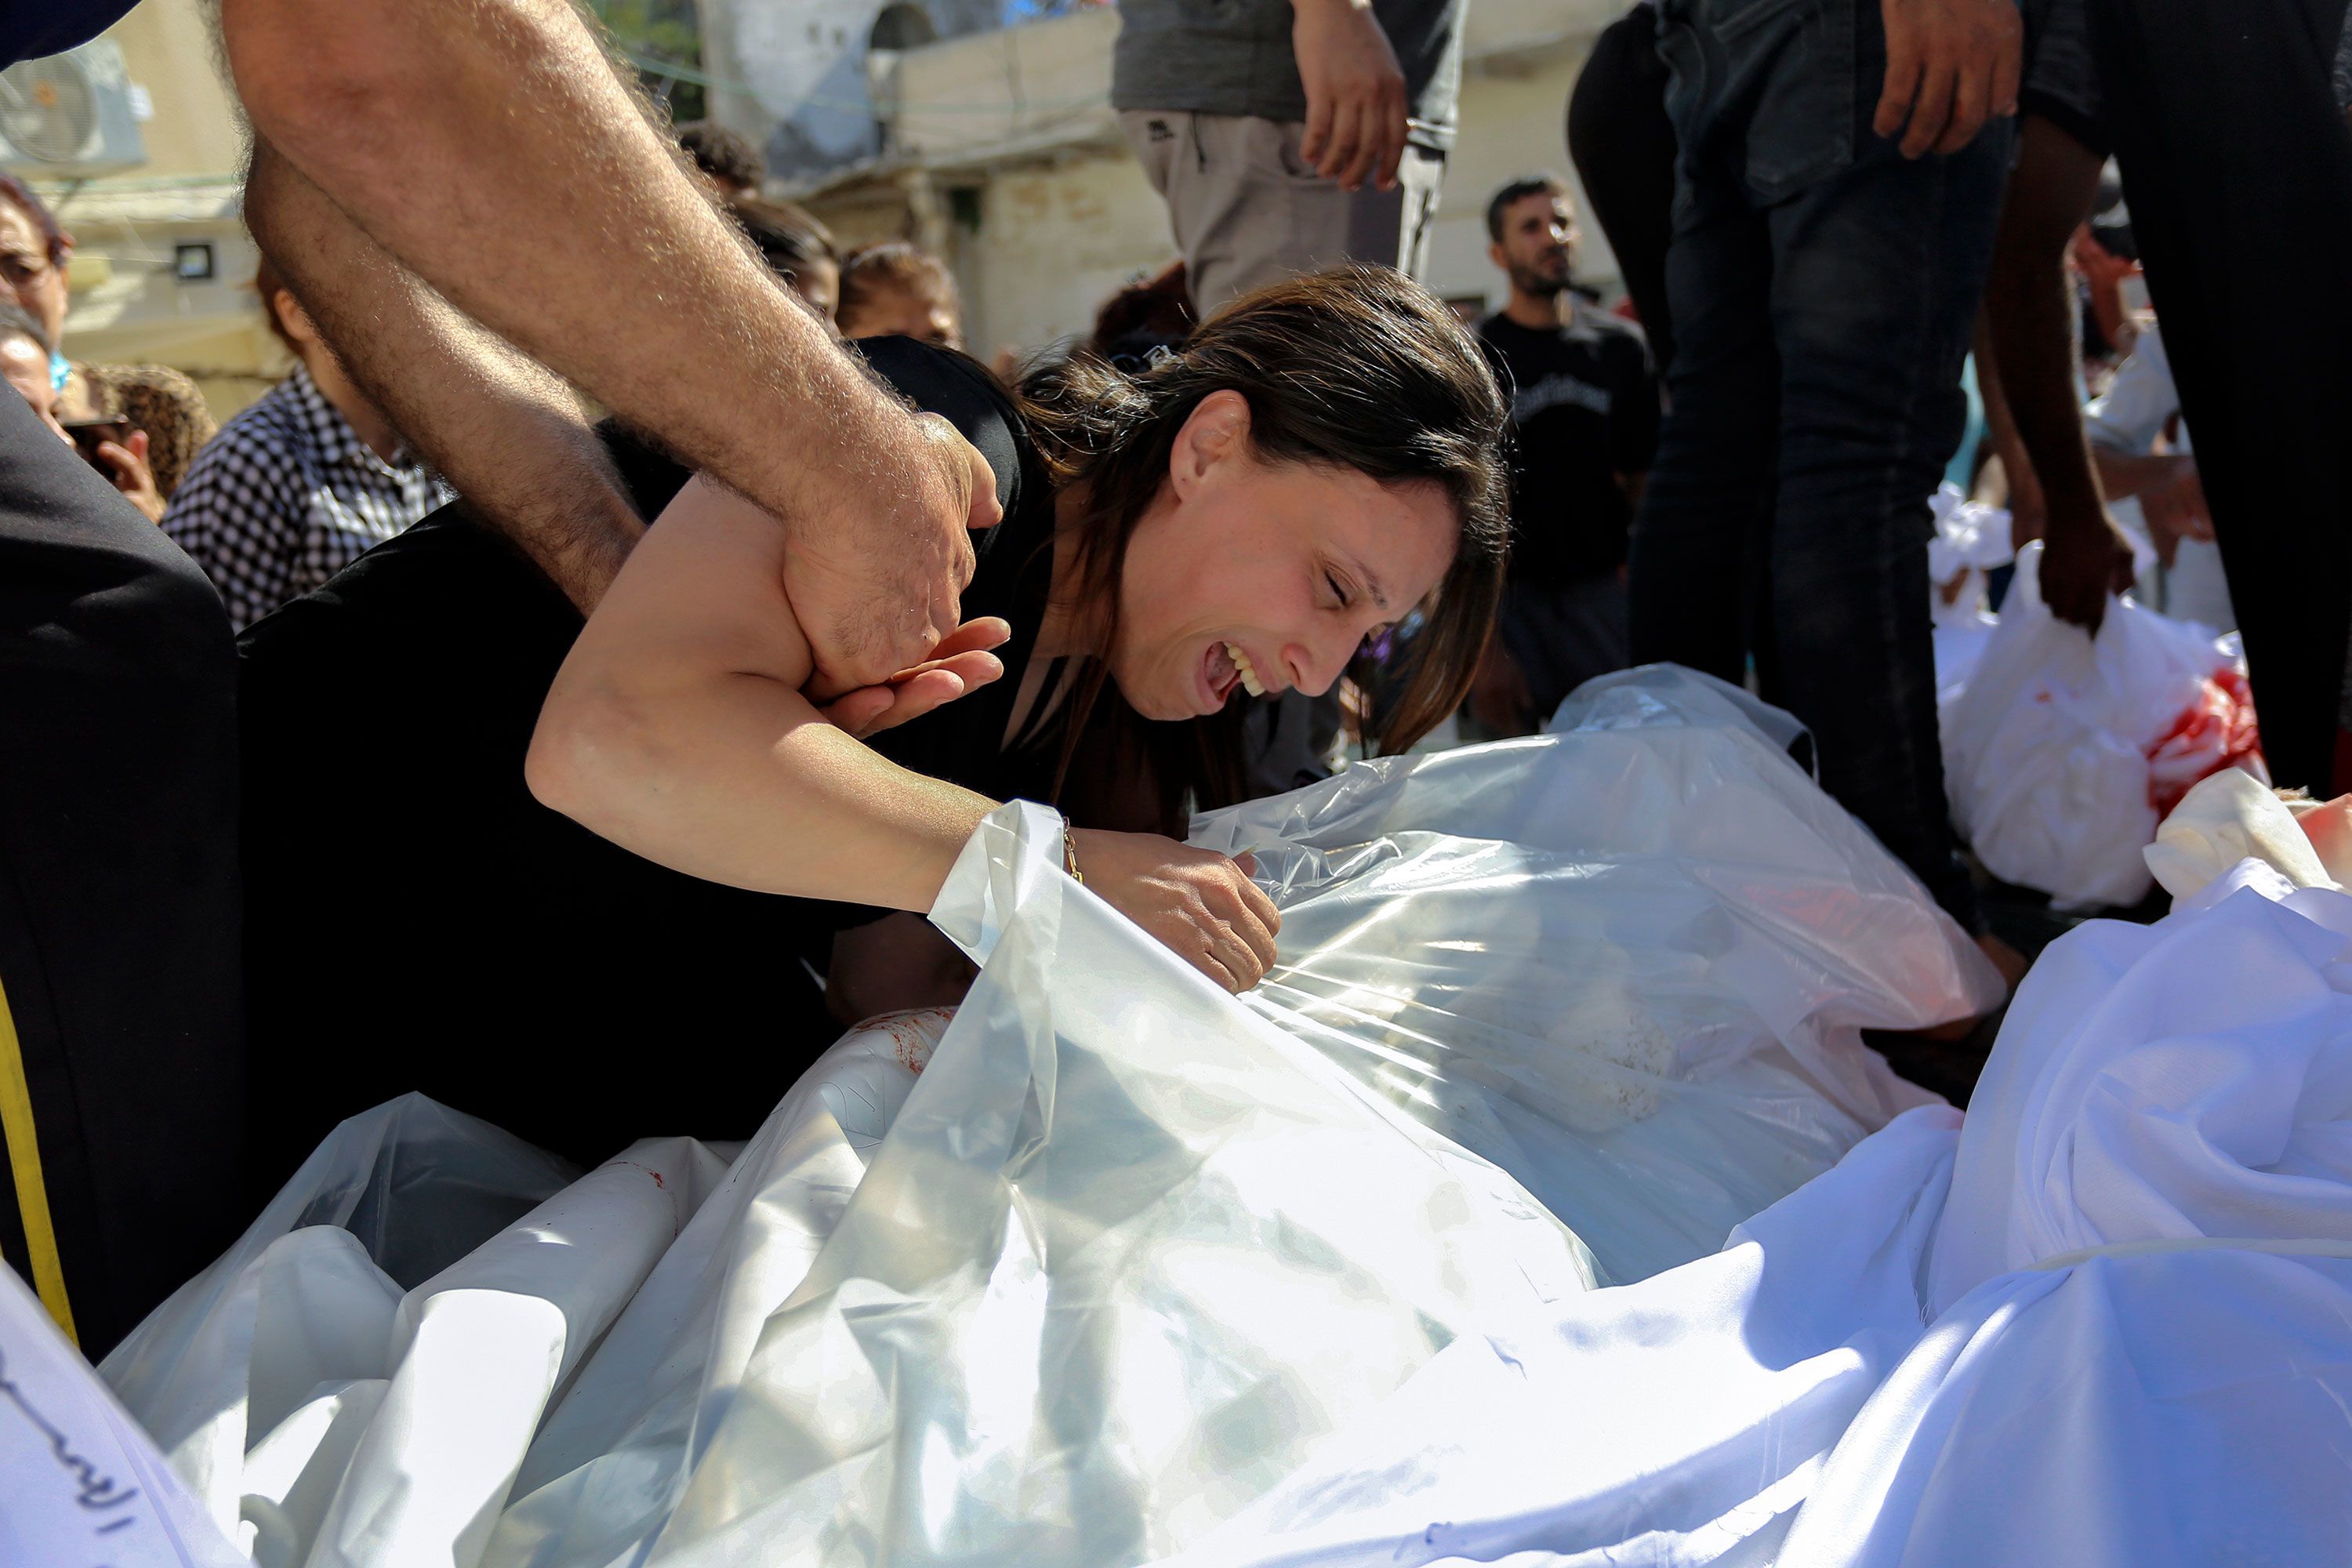 A Palestinian woman mourns over the bodies of her relatives who were killed an Israeli airstrike that hit a Greek Orthodox church in Gaza City on October 20.